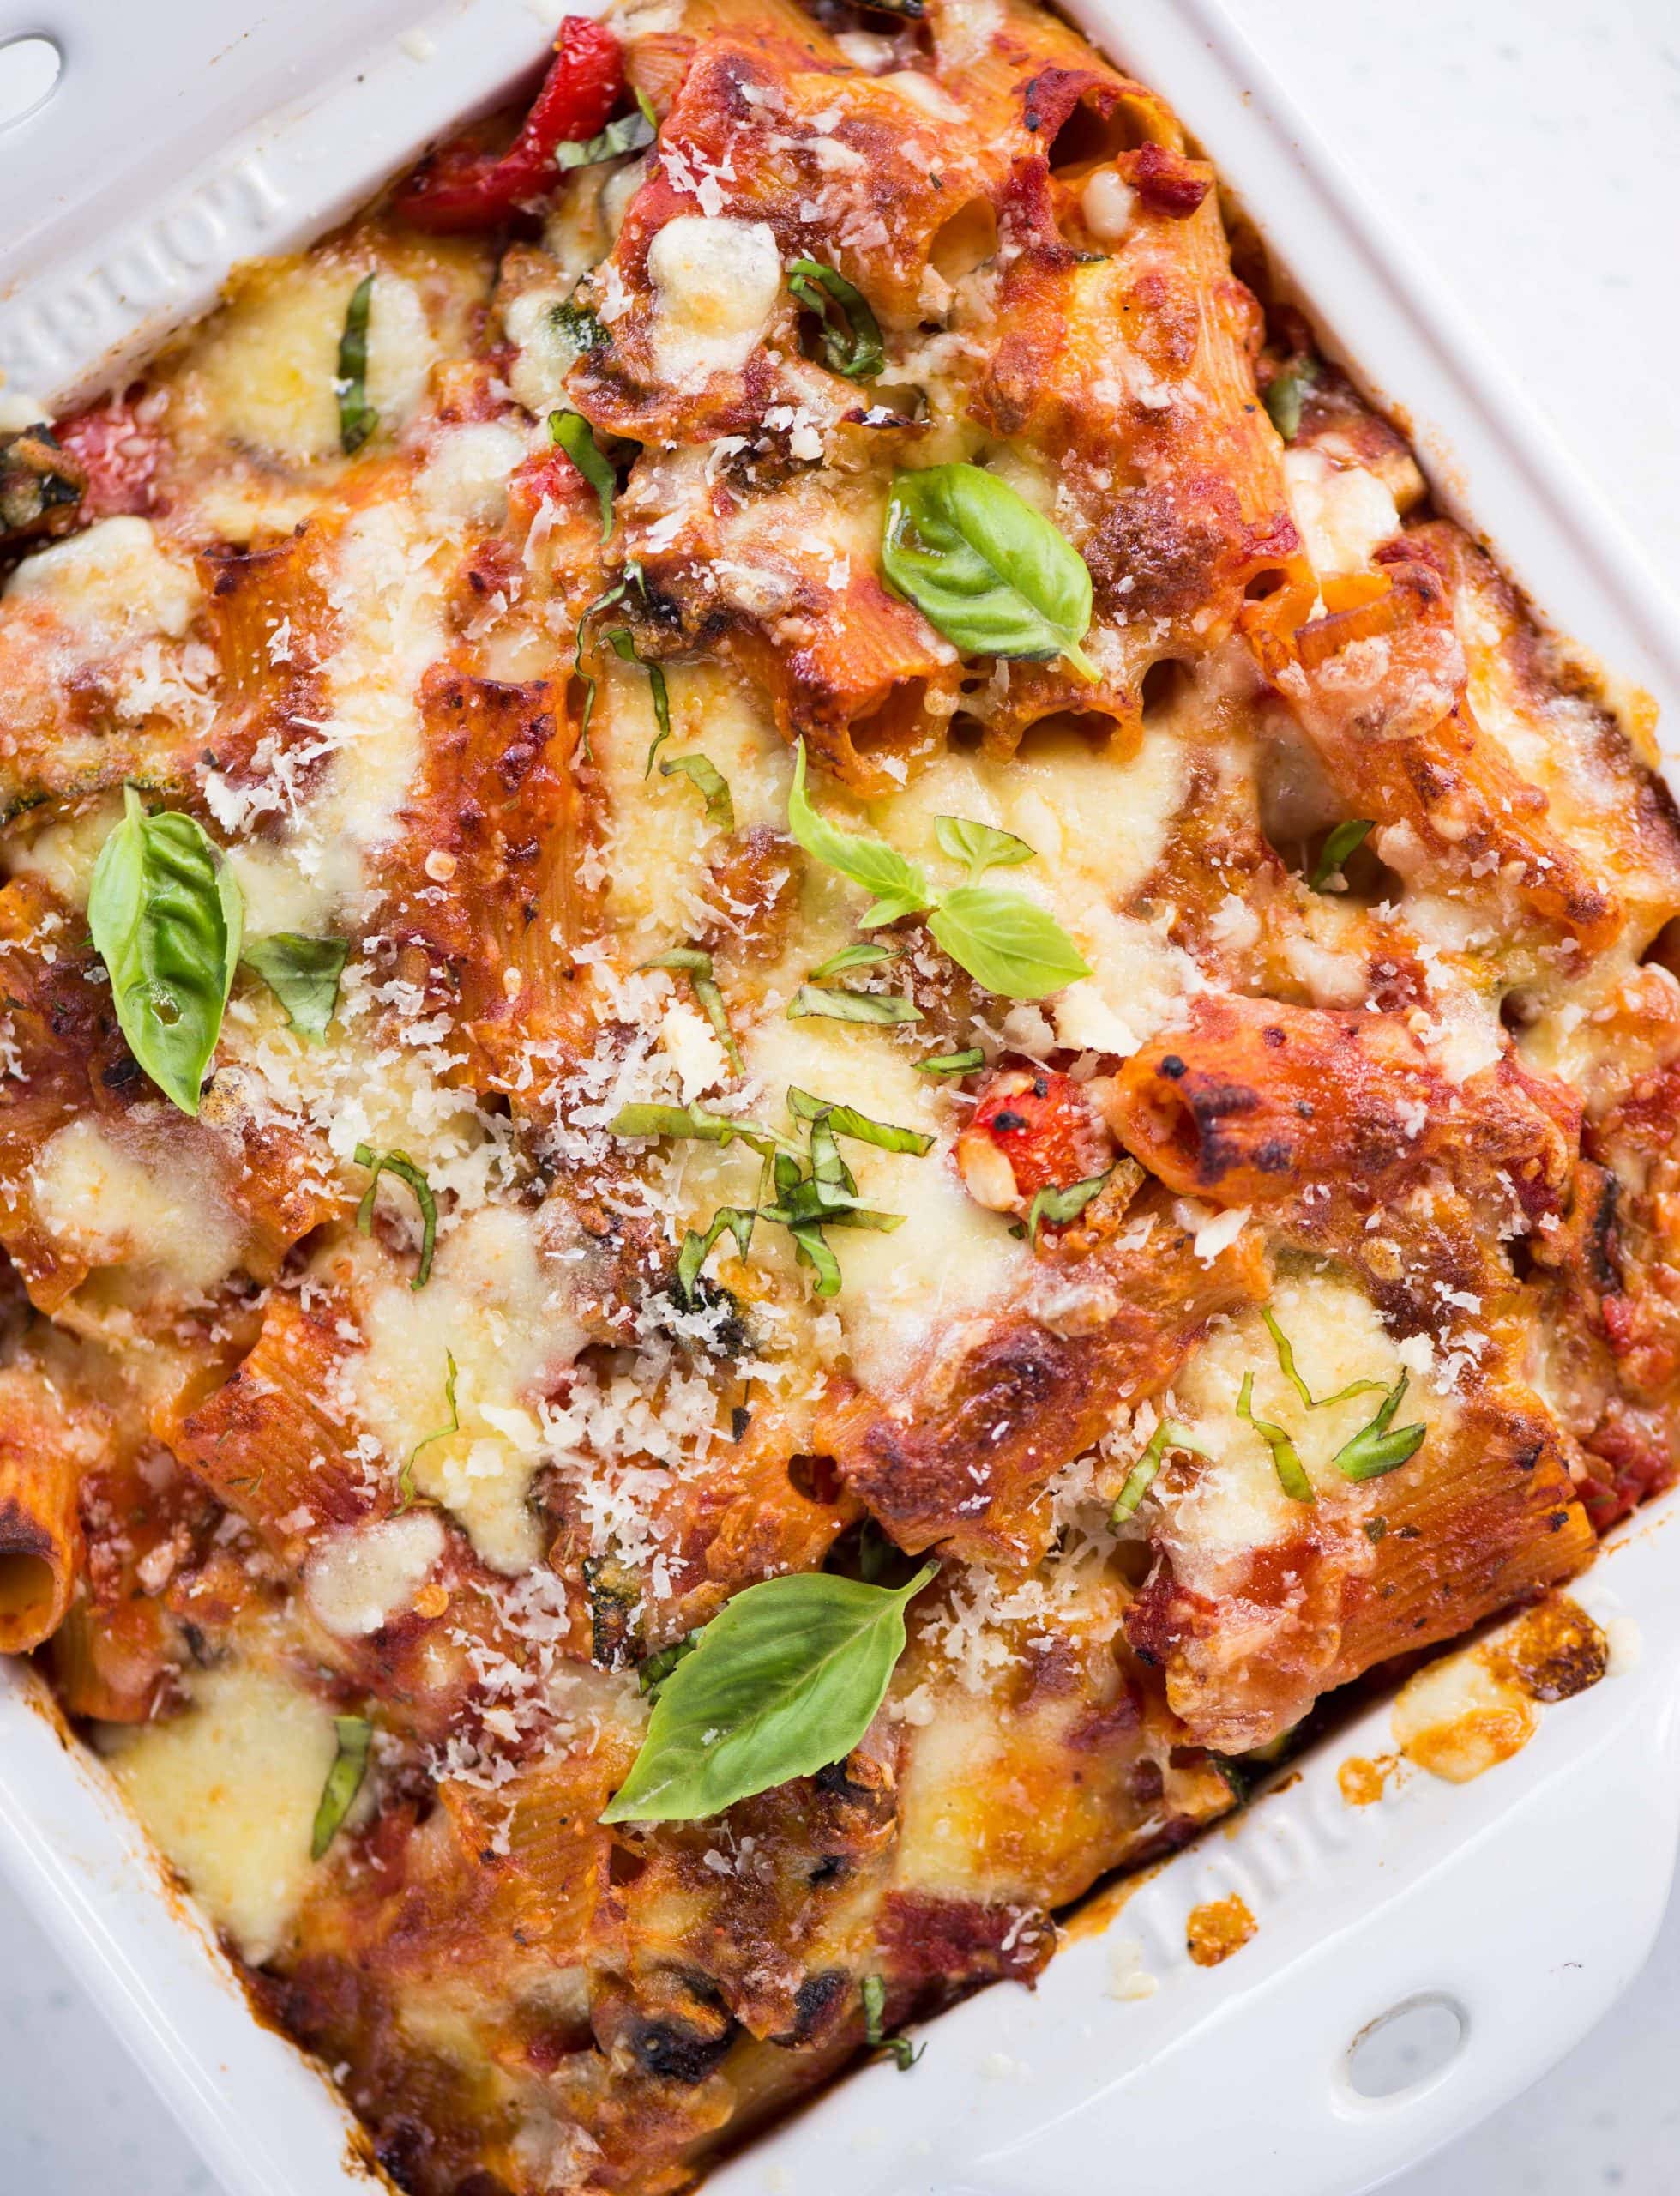 An Easy and delicious Vegetable Pasta dish that brings the goodness of vegetables and the flavours of cheese and garlic to pasta. This pasta bake recipe  is versatile and you can make with veggies and ingredients from the pantry.